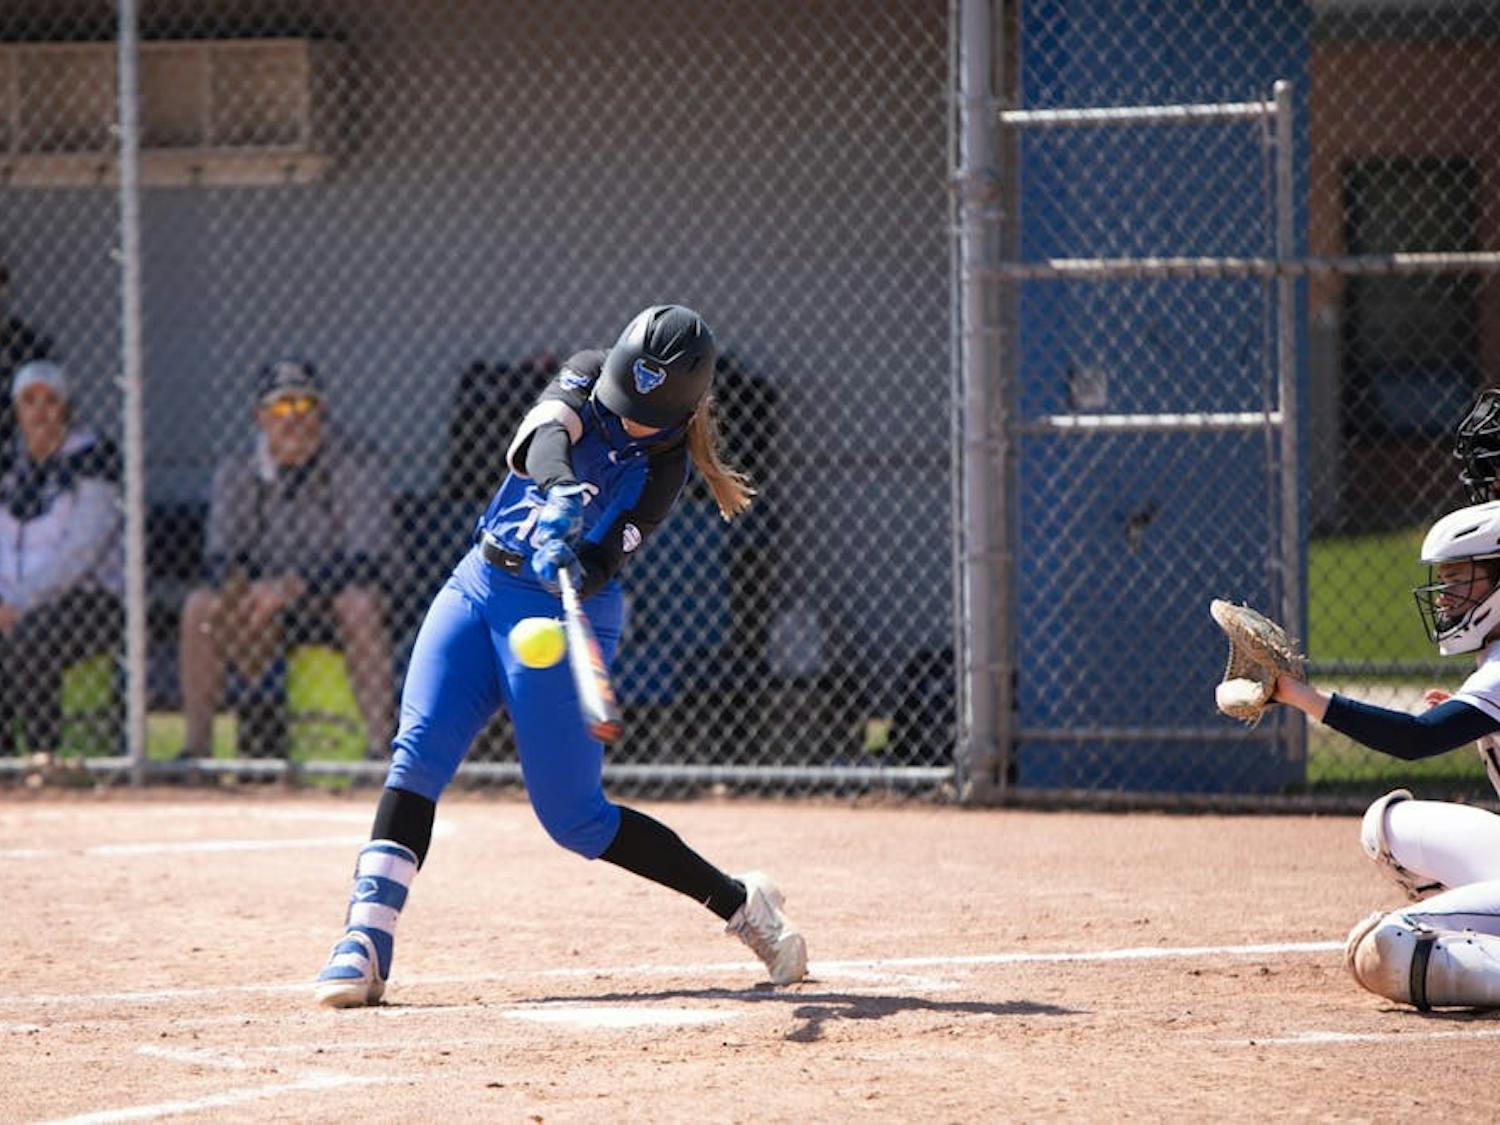 UB softball moved to 6-9 after a 2-3 weekend.